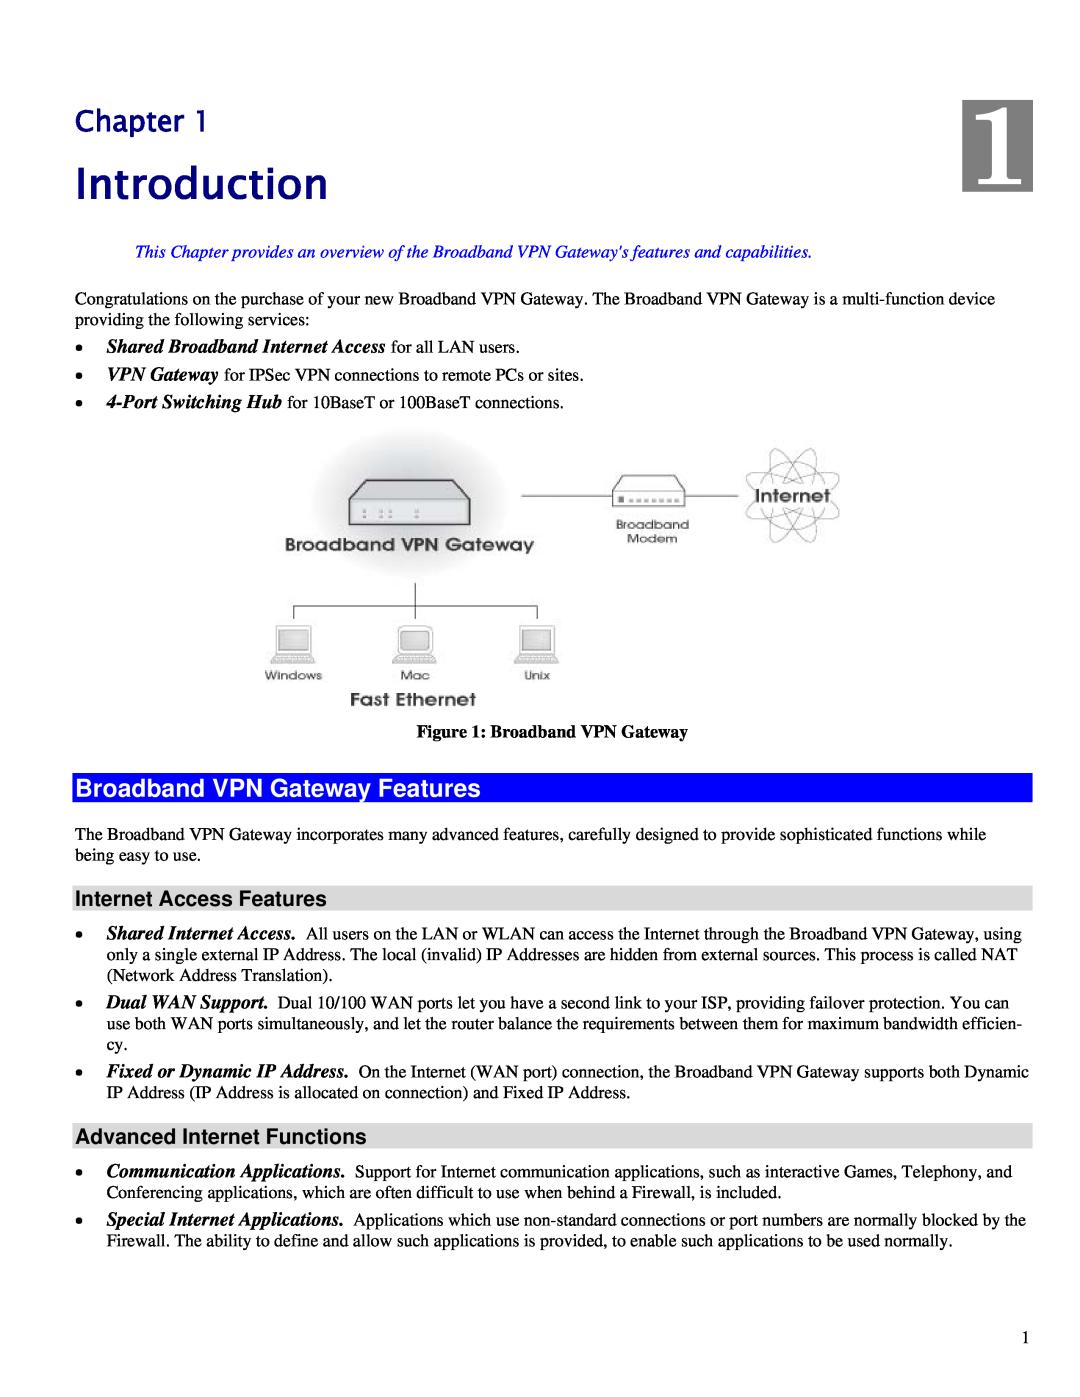 TRENDnet TW100-BRV324 manual Introduction, Chapter, Broadband VPN Gateway Features, Internet Access Features 